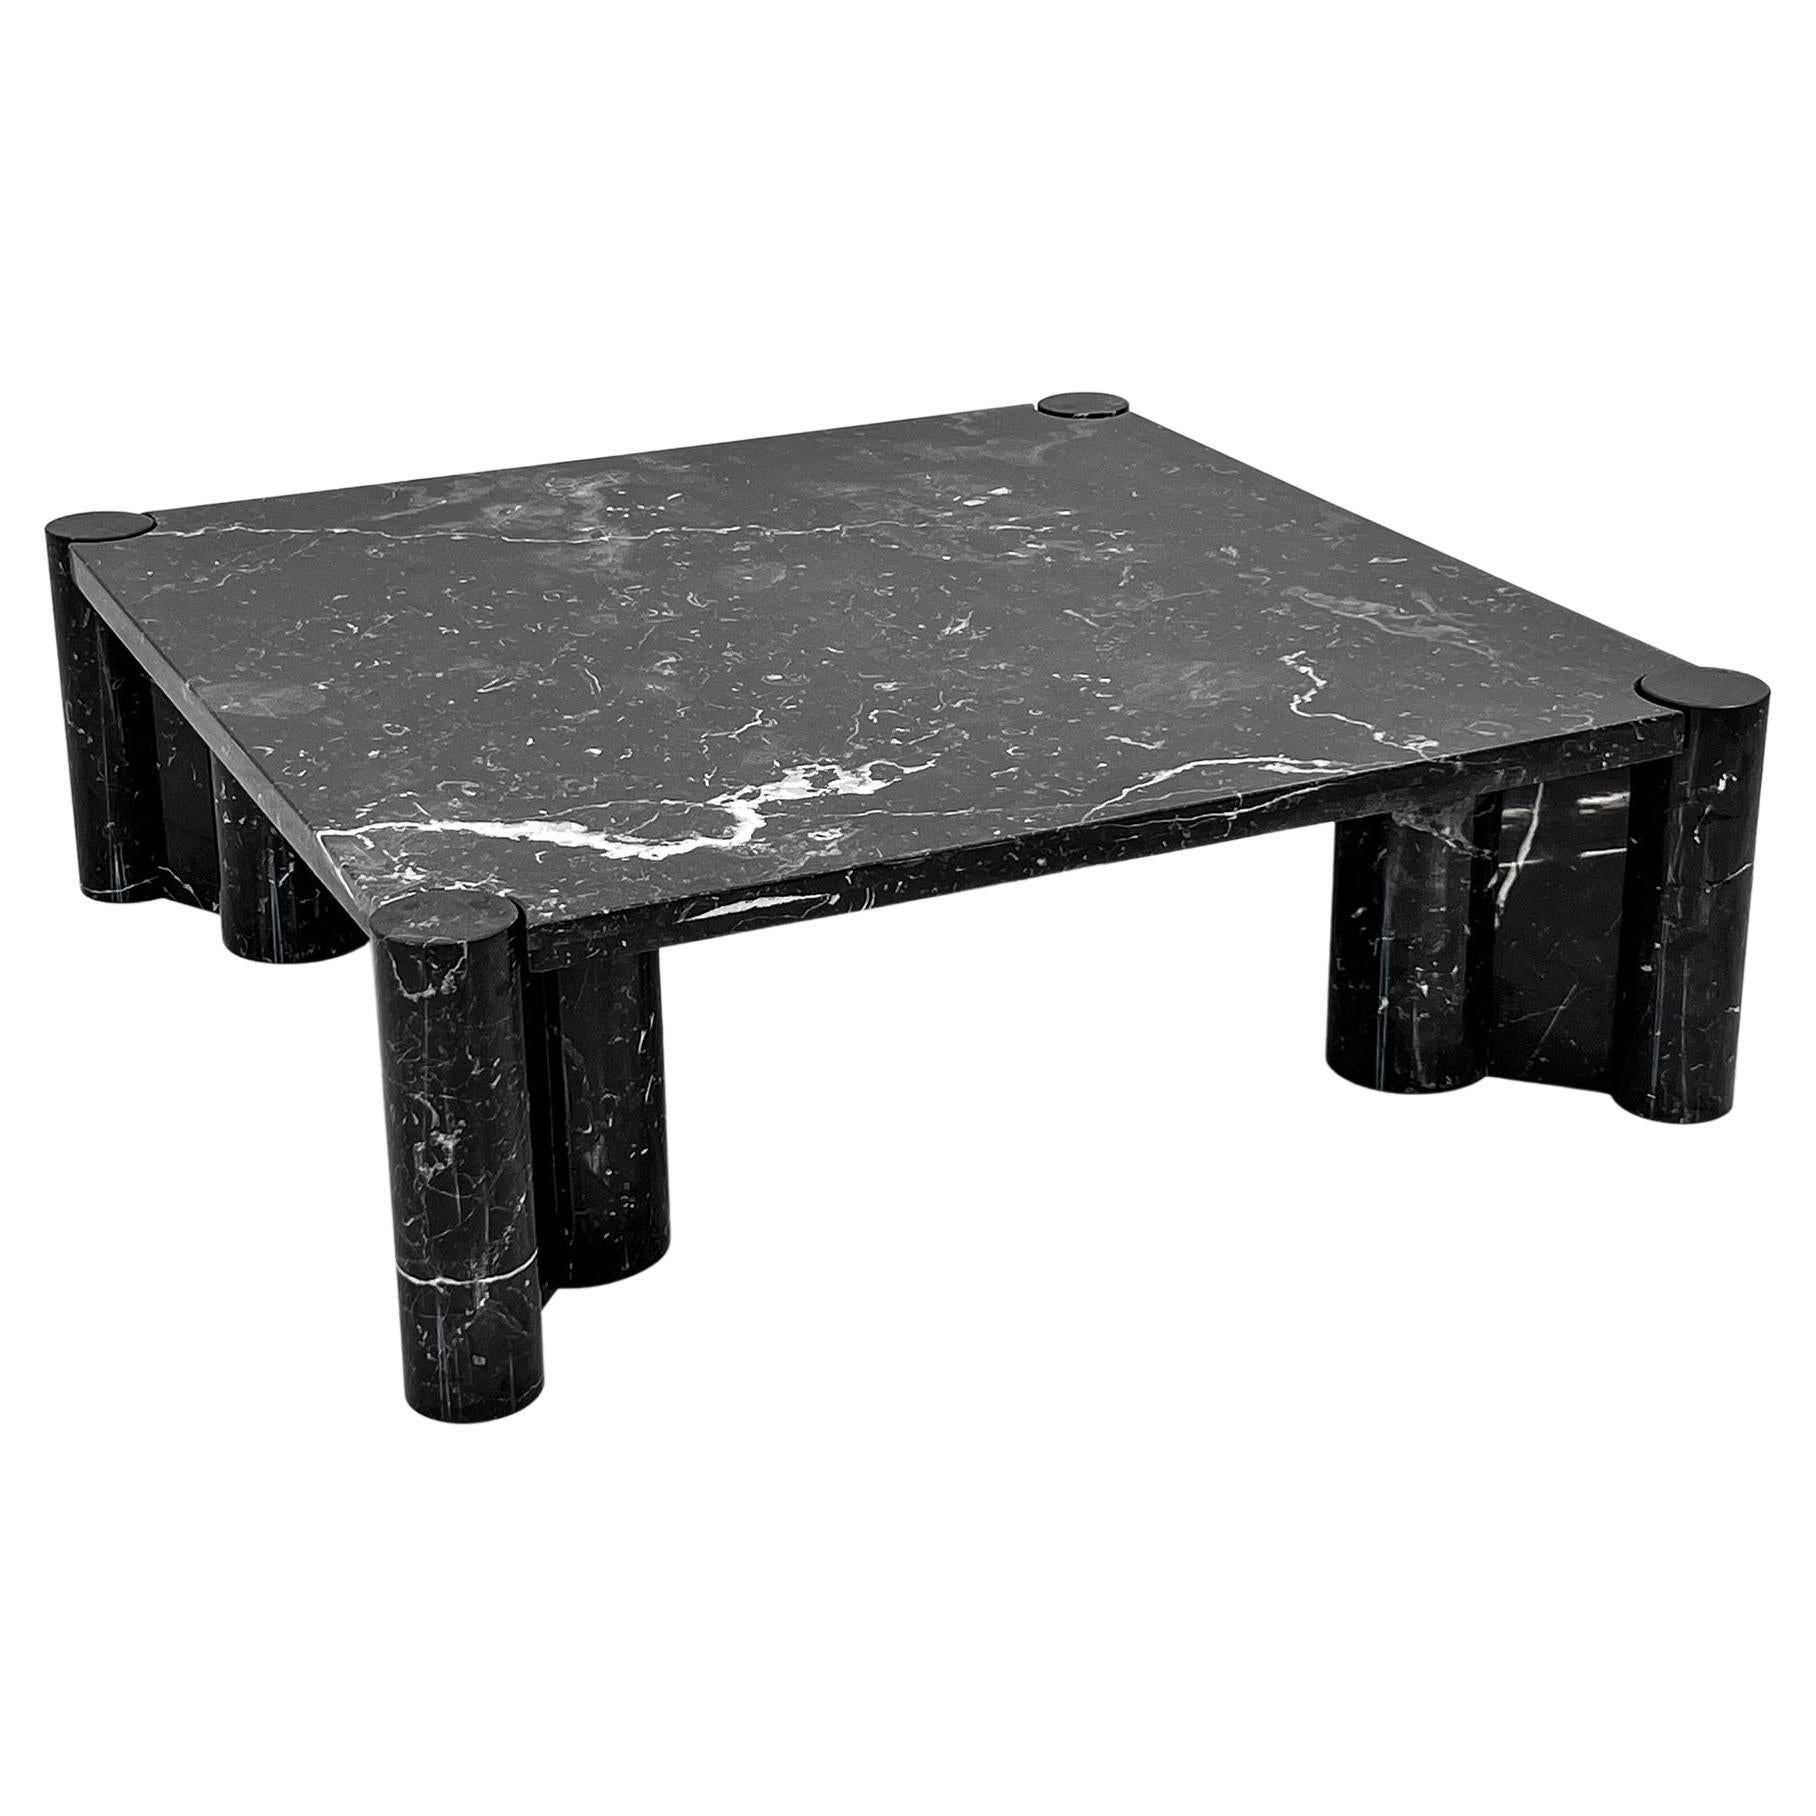 Gae Aulenti Jumbo Coffee Table for Knoll in Nero Marquina Marble For Sale